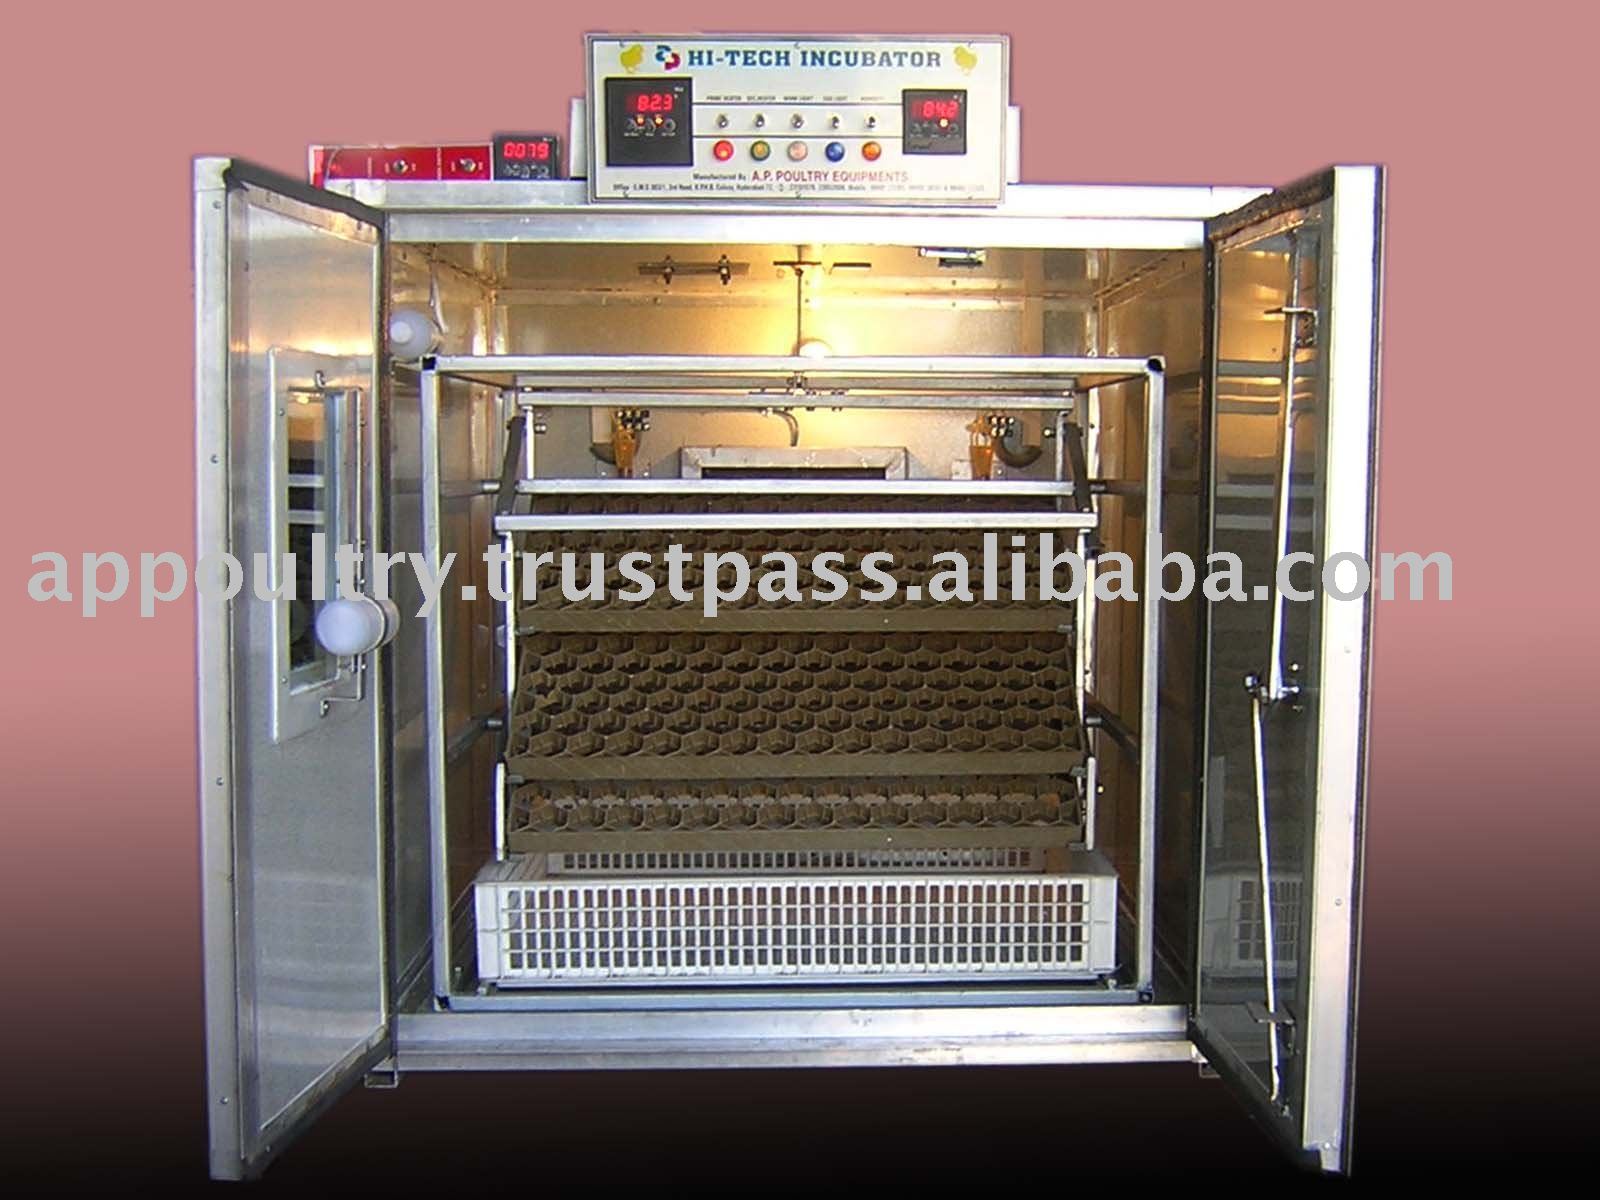 500EGGS Incubator, View 500EGGS Incubator, AP POULTRY Product Details 